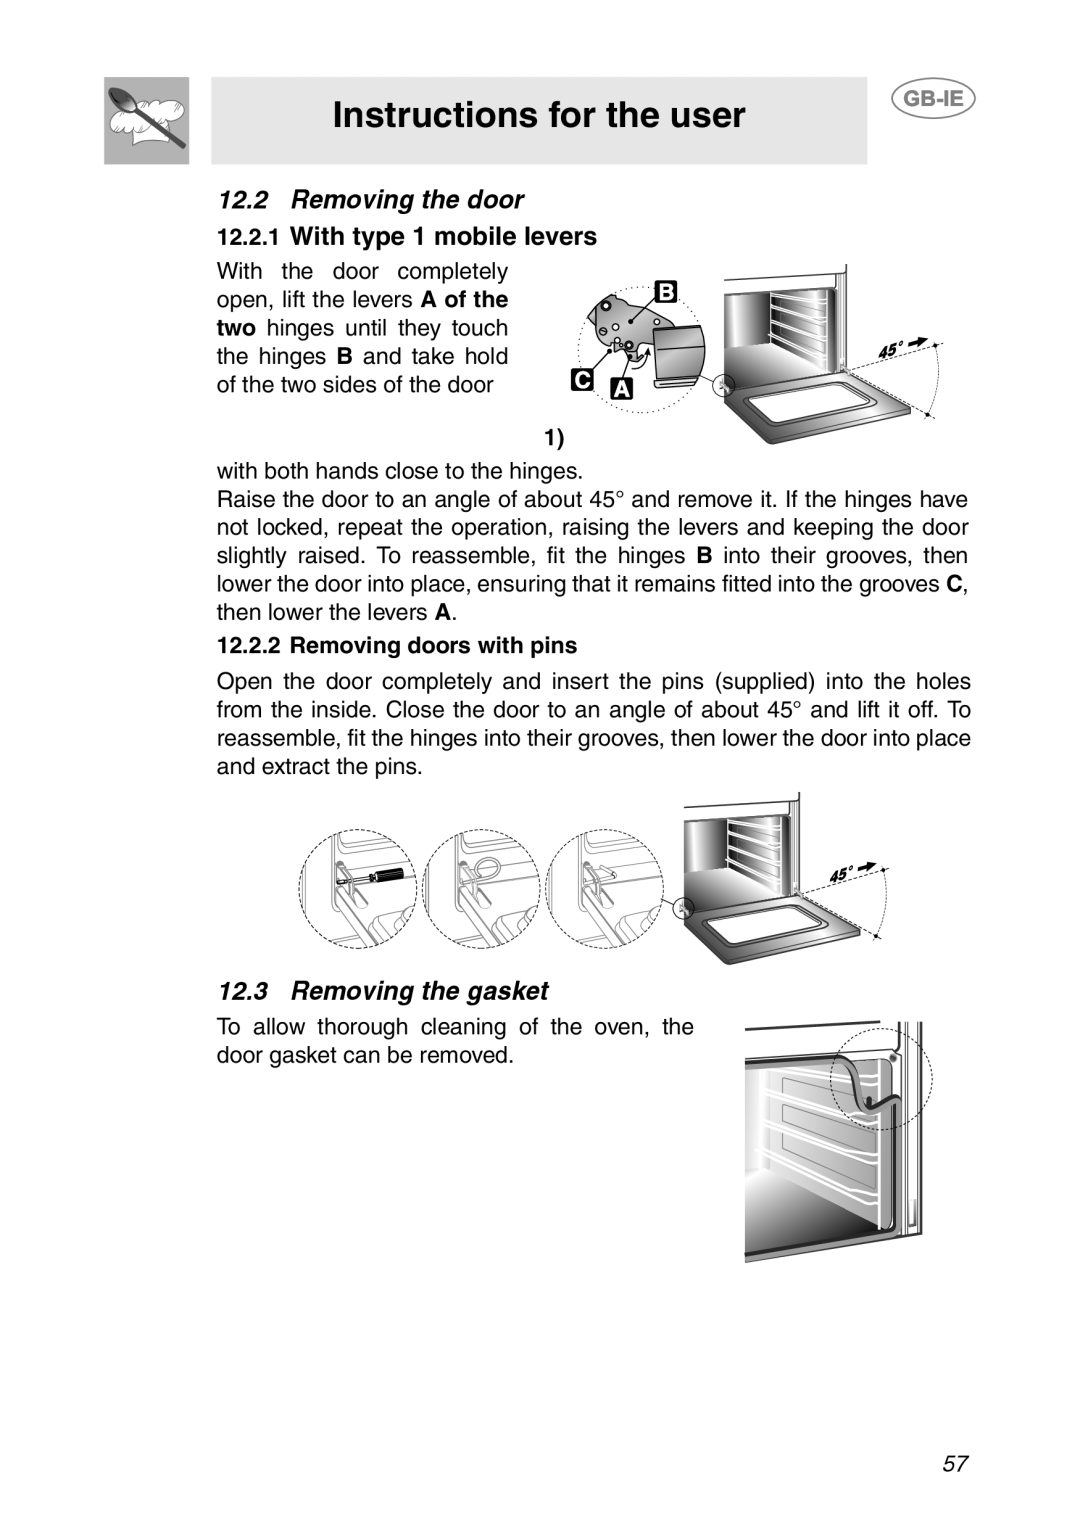 Smeg SC106ALU manual Removing the door, Removing the gasket, Removing doors with pins, Instructions for the user 